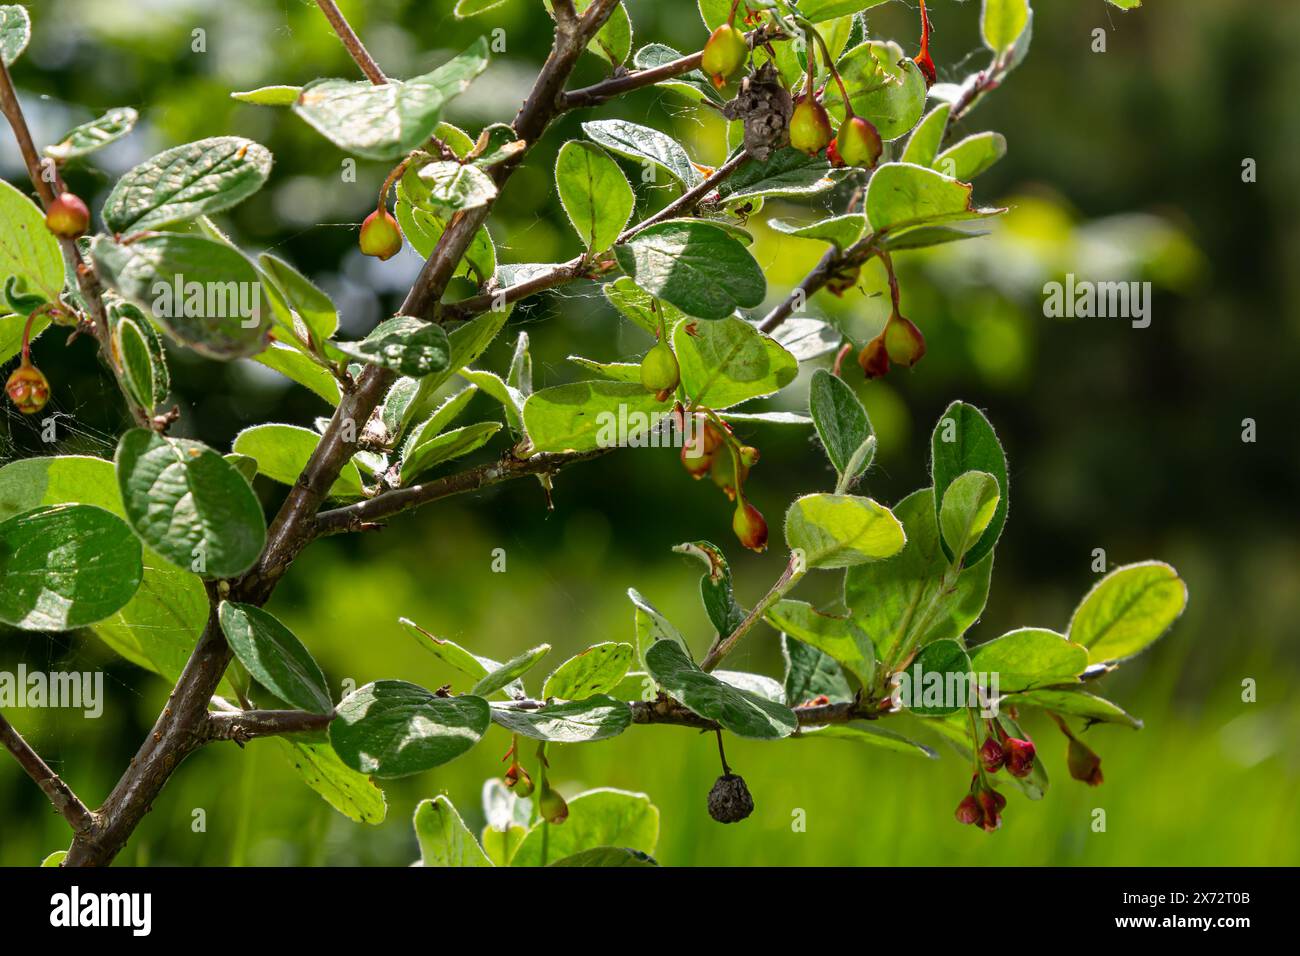 Cotoneaster integerrimus red autumn fruits and green leaves on branches, ripening hairy berries, green leaves. Stock Photo